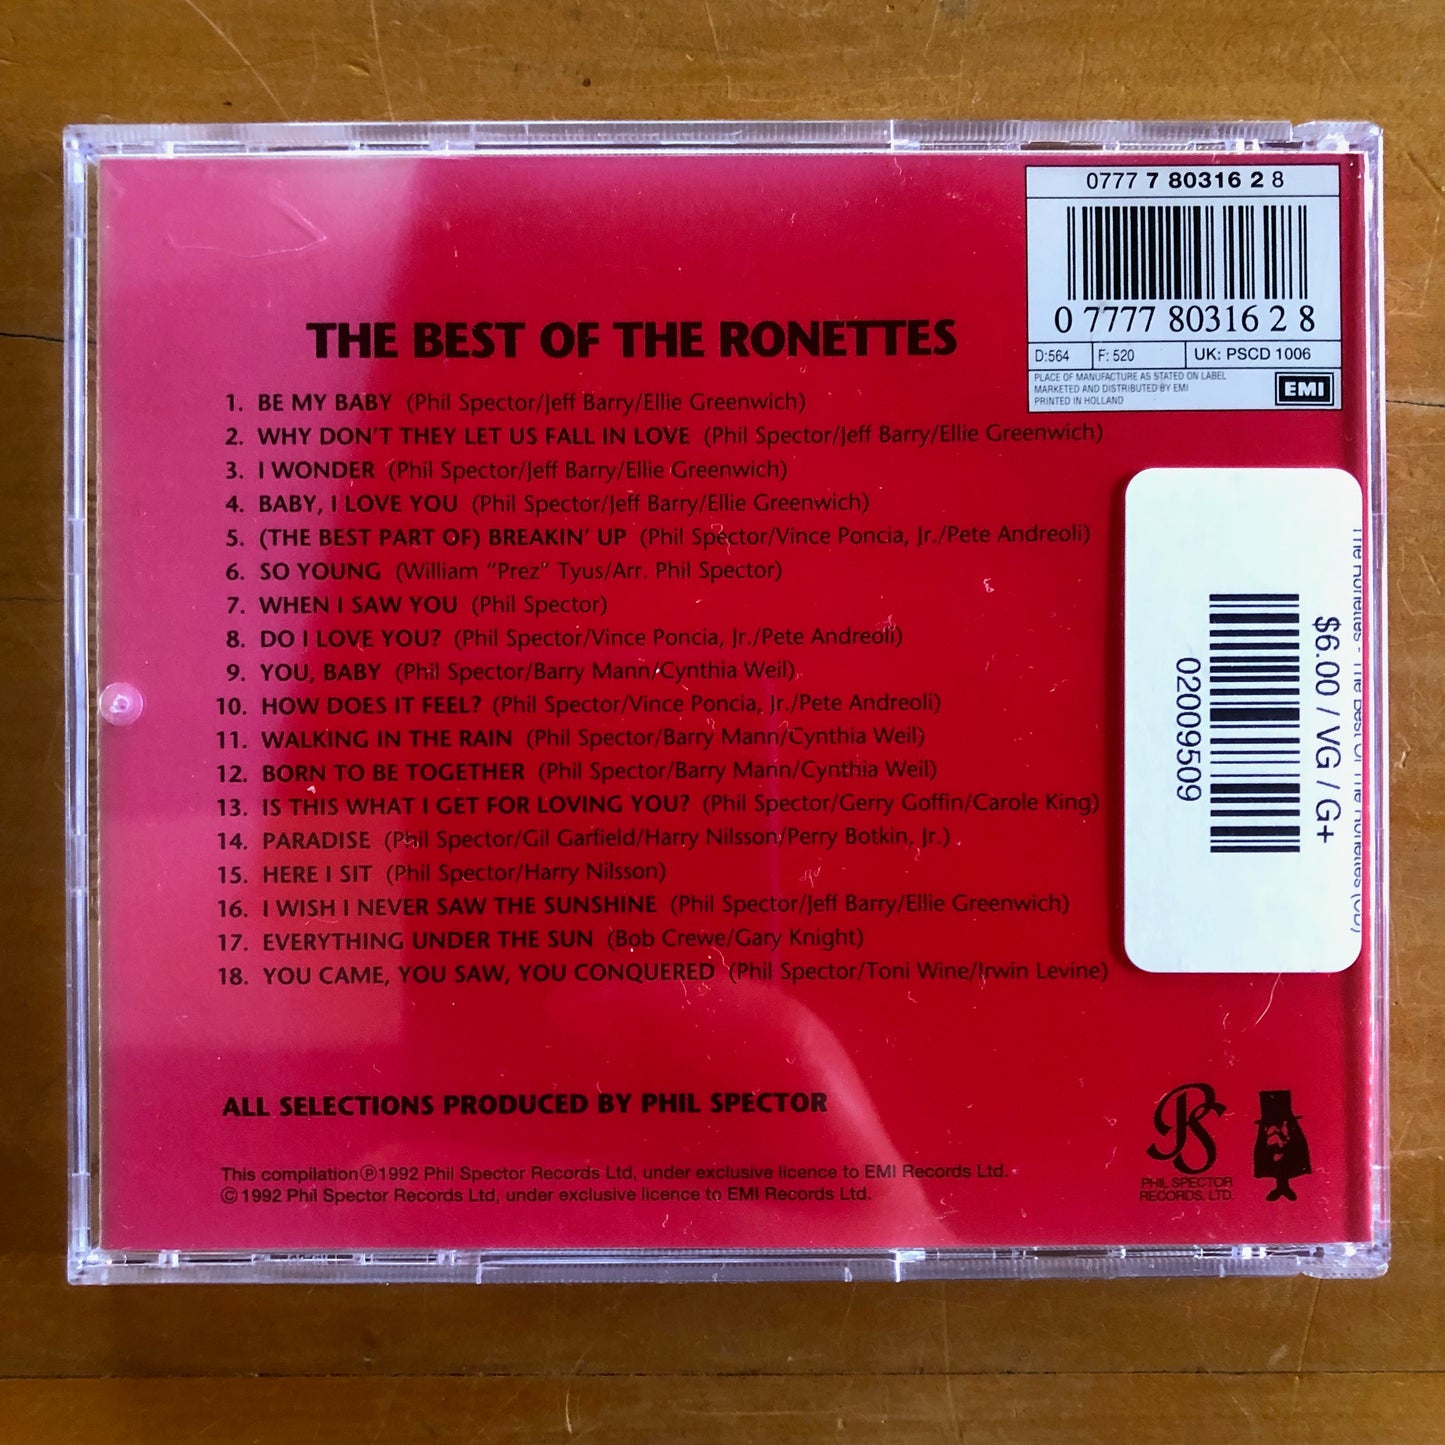 The Ronettes - The Best Of The Ronettes (CD)